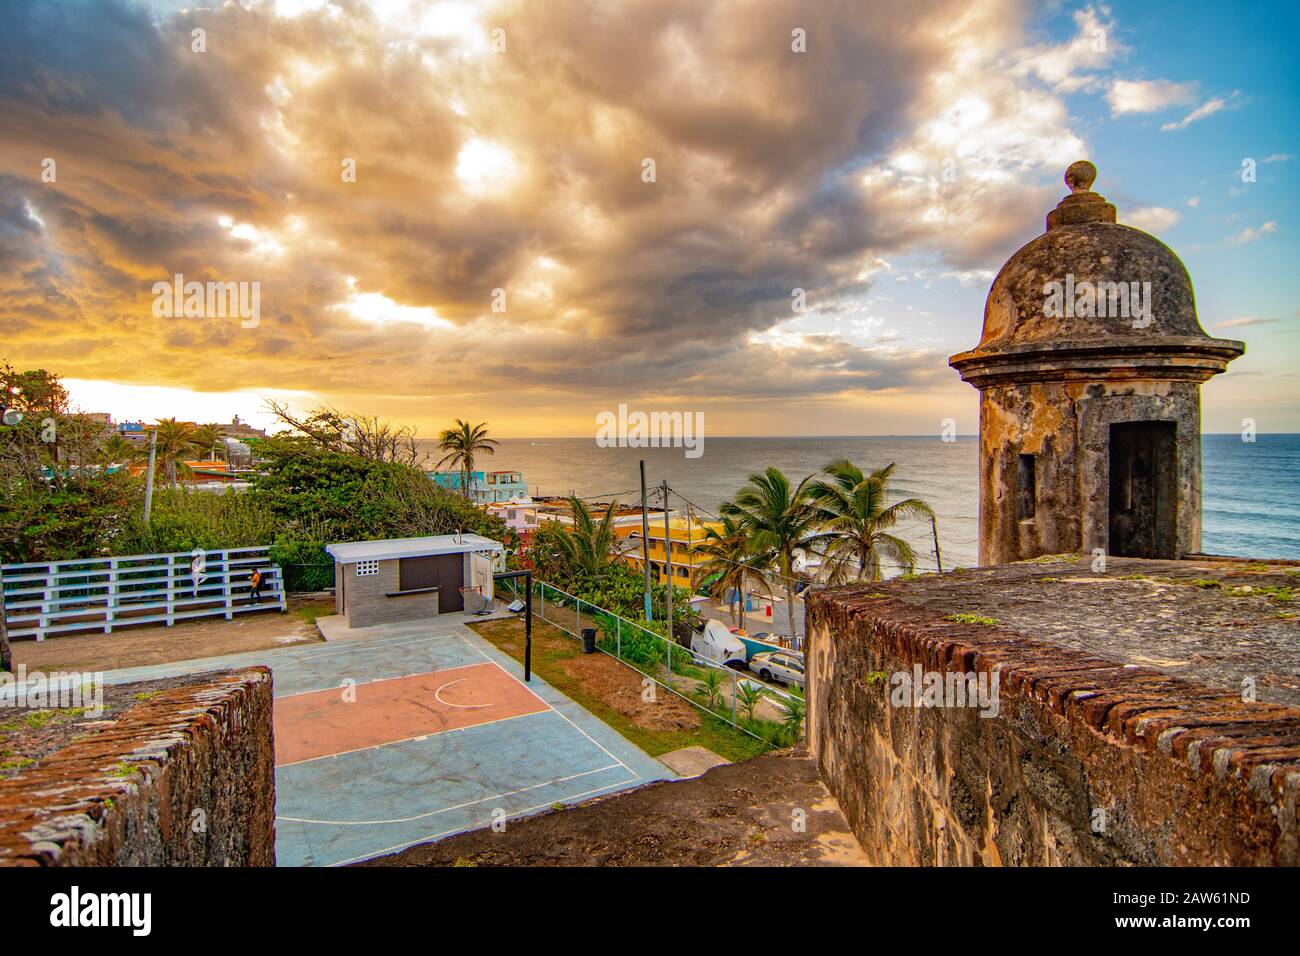 A lookout tower at the Castillo San Cristobal fort over looks the colorful houses of La Perla and a basketball court with a colorful sunset. Stock Photo